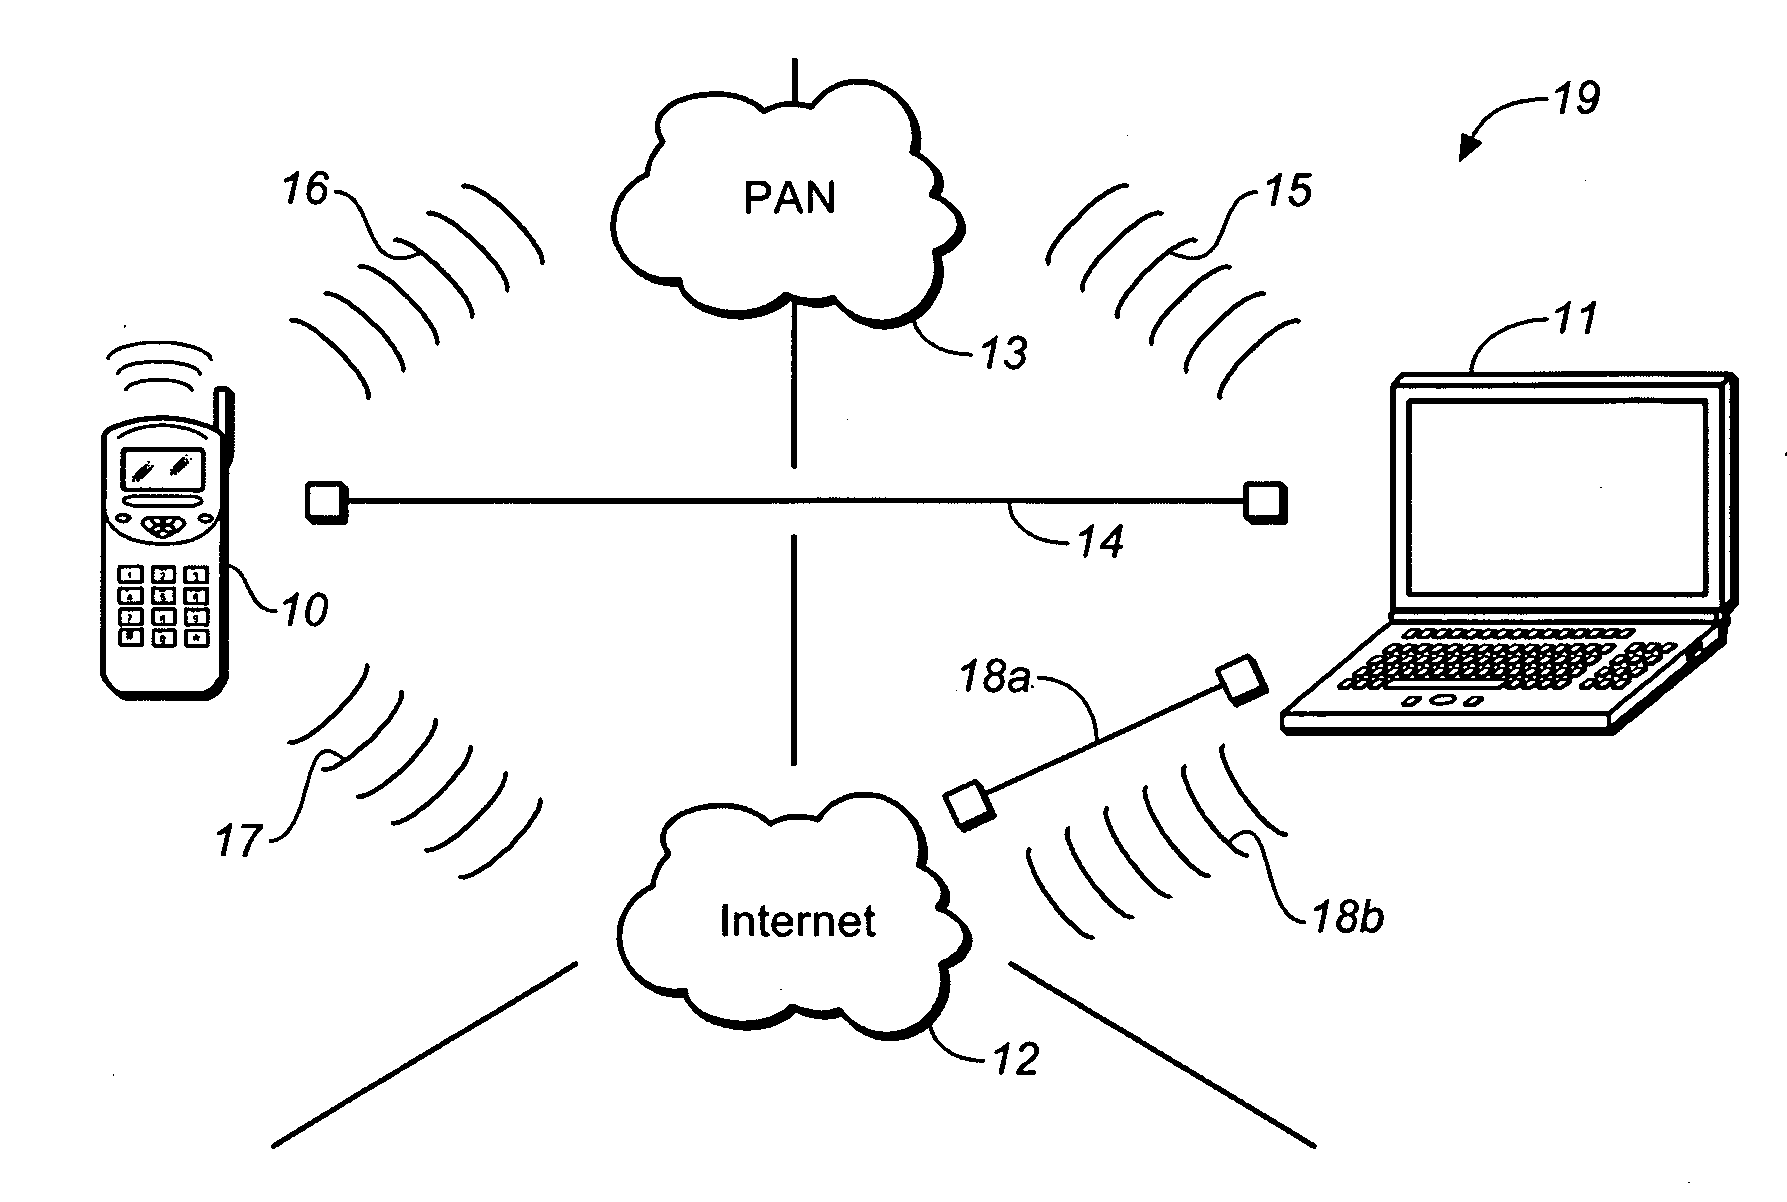 System and method for seamless management of multi-personality mobile devices